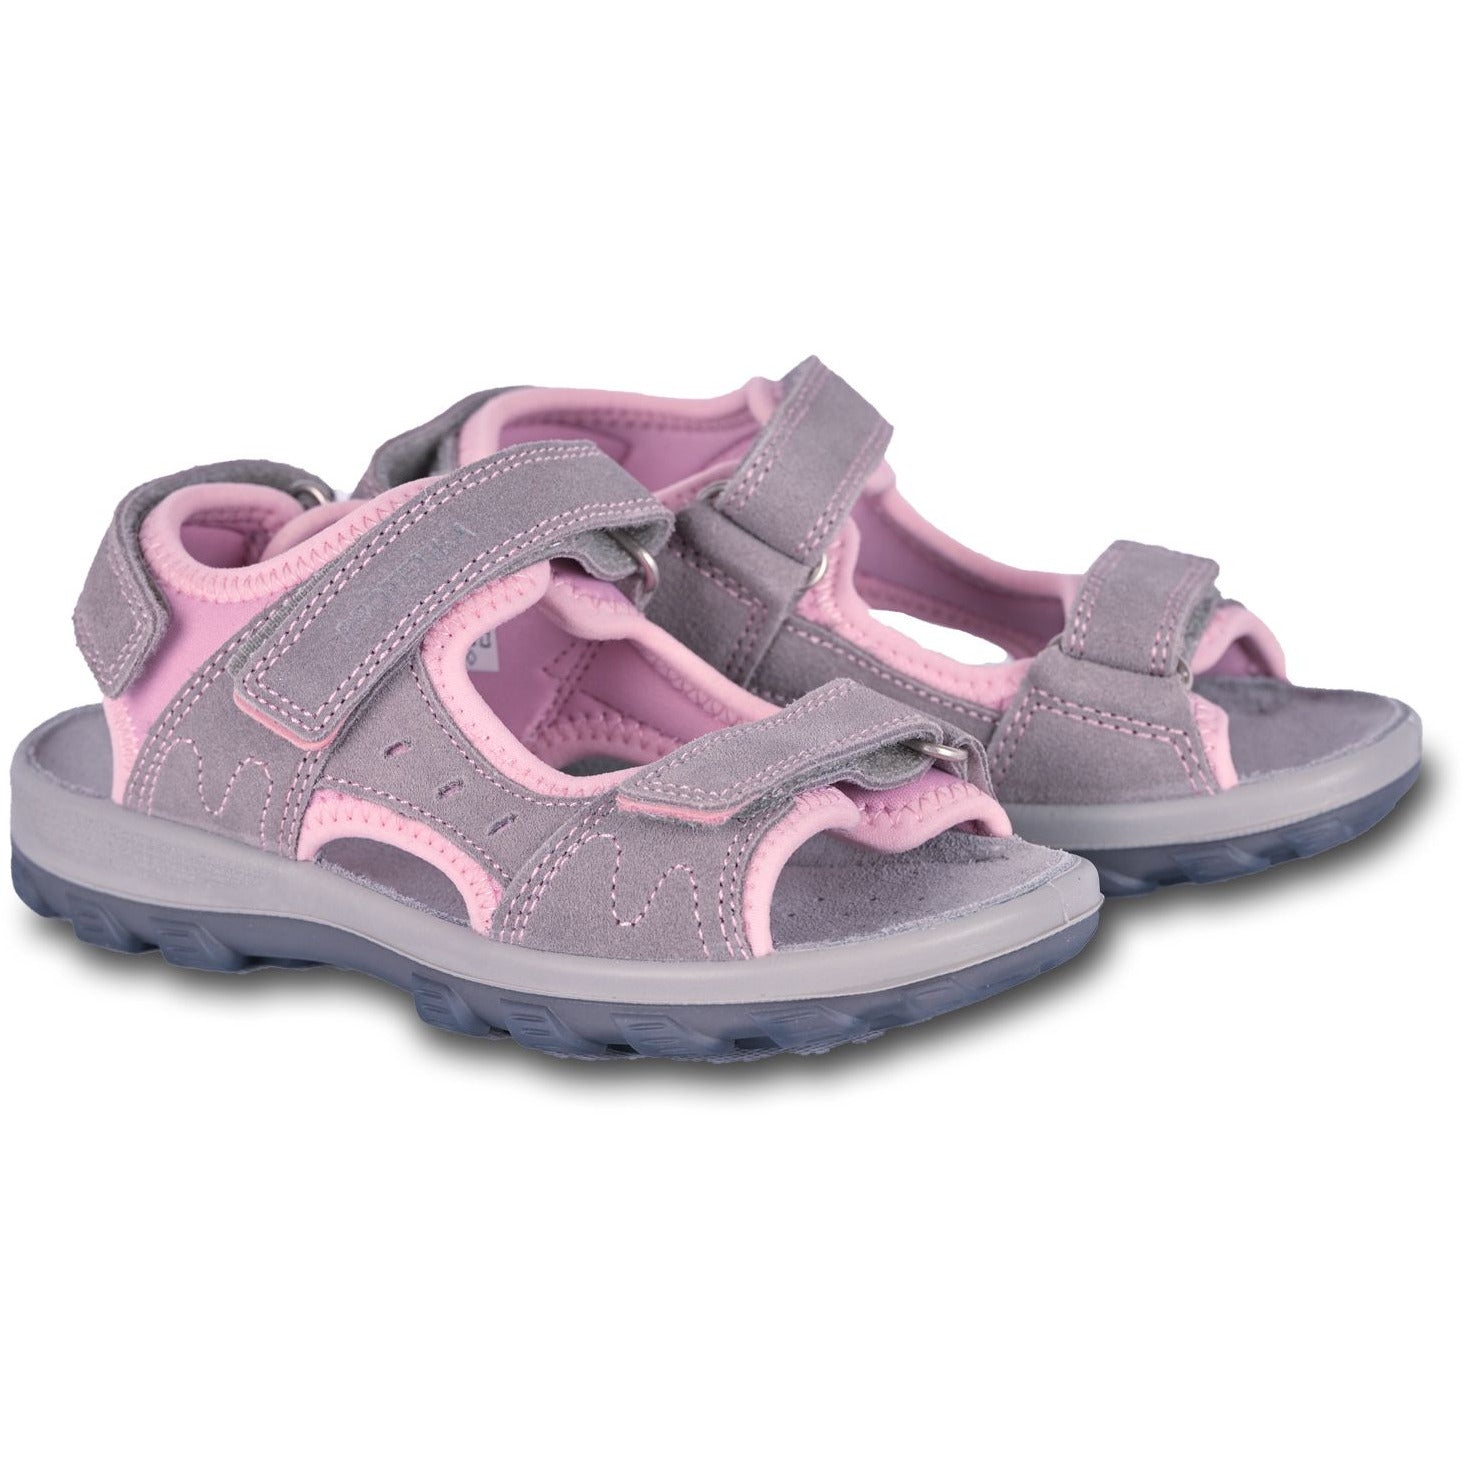 KORY pink older girls arch support sandals - feelgoodshoes.ae